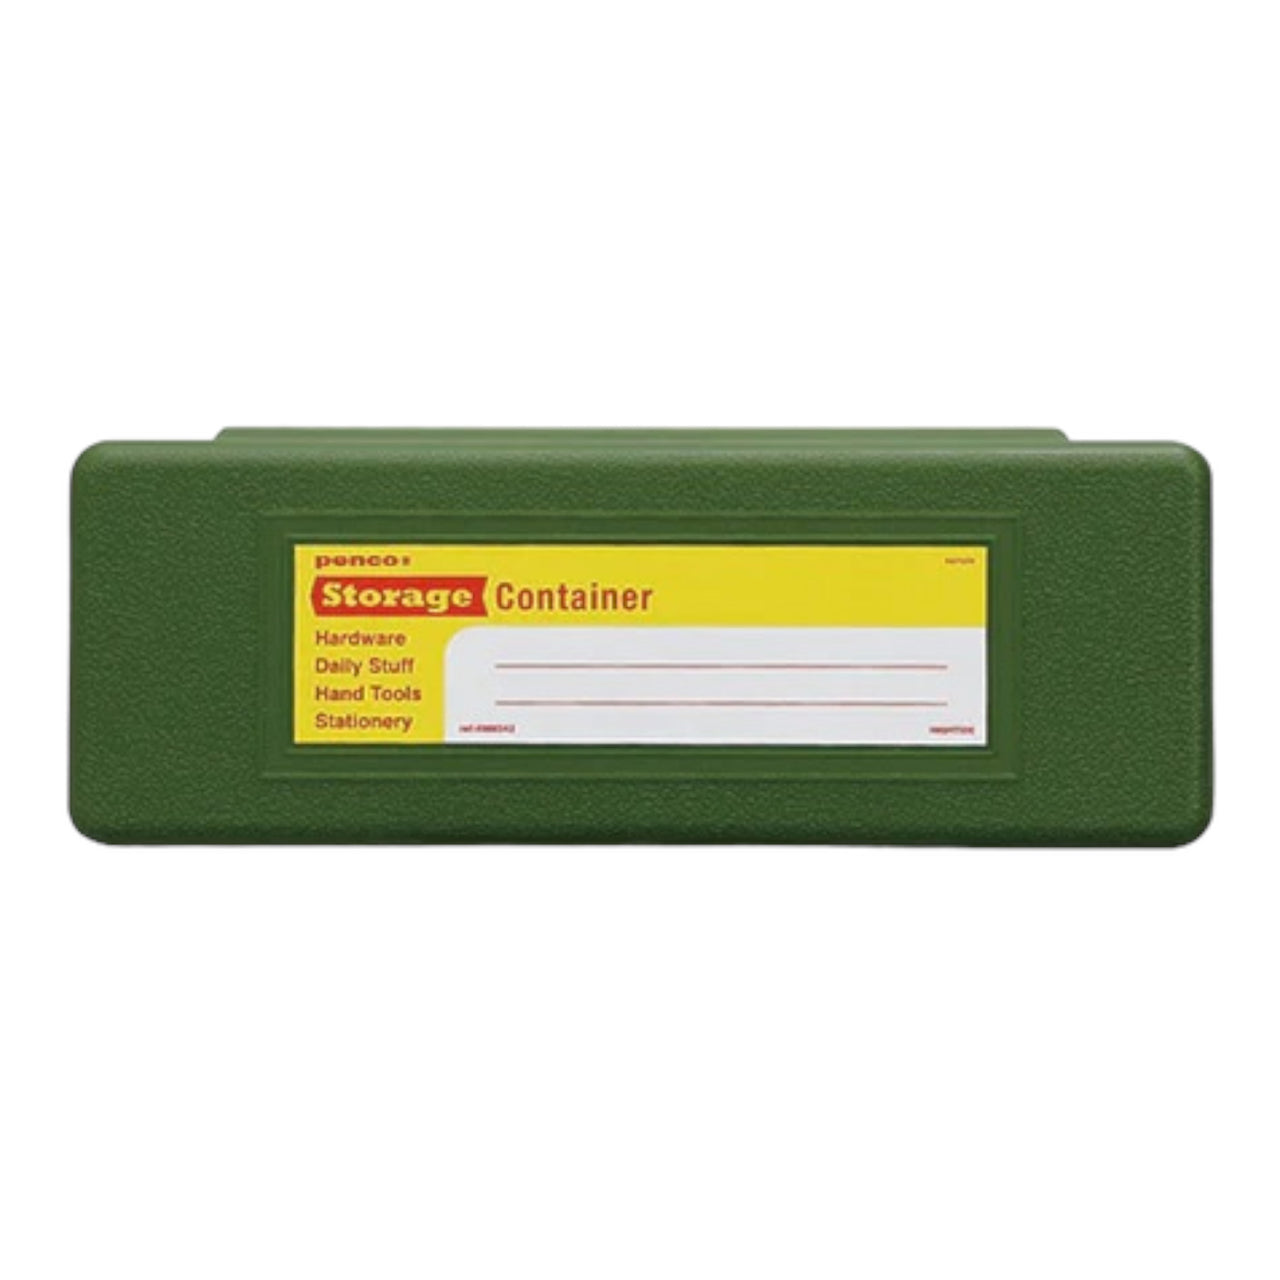 Storage Container Pen Case | Green